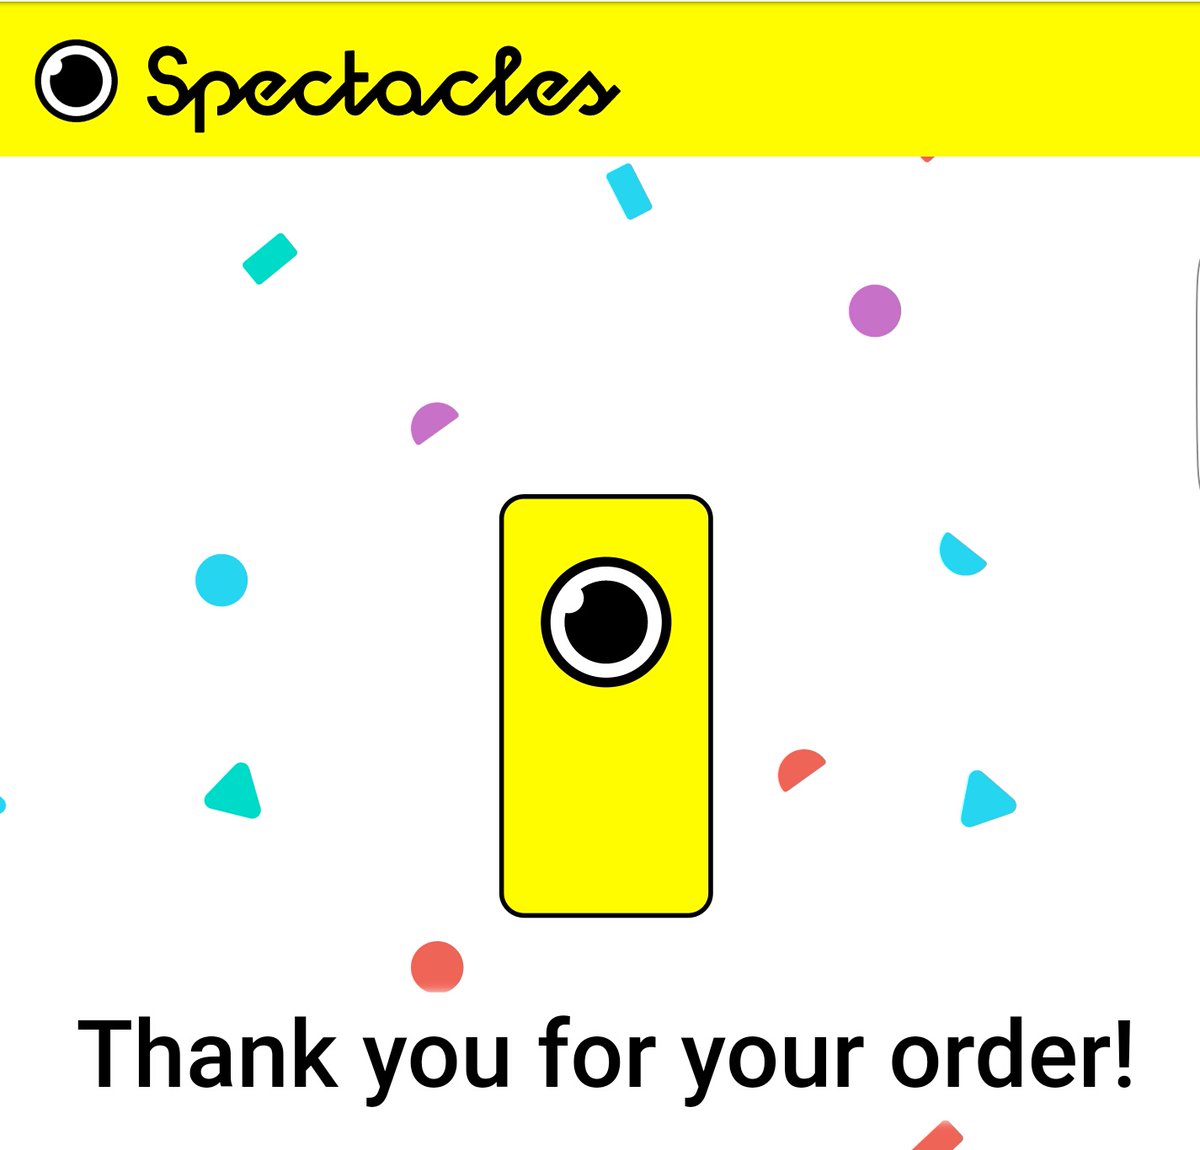 Snapchat Spectacles Are Now Available For Online Purchase